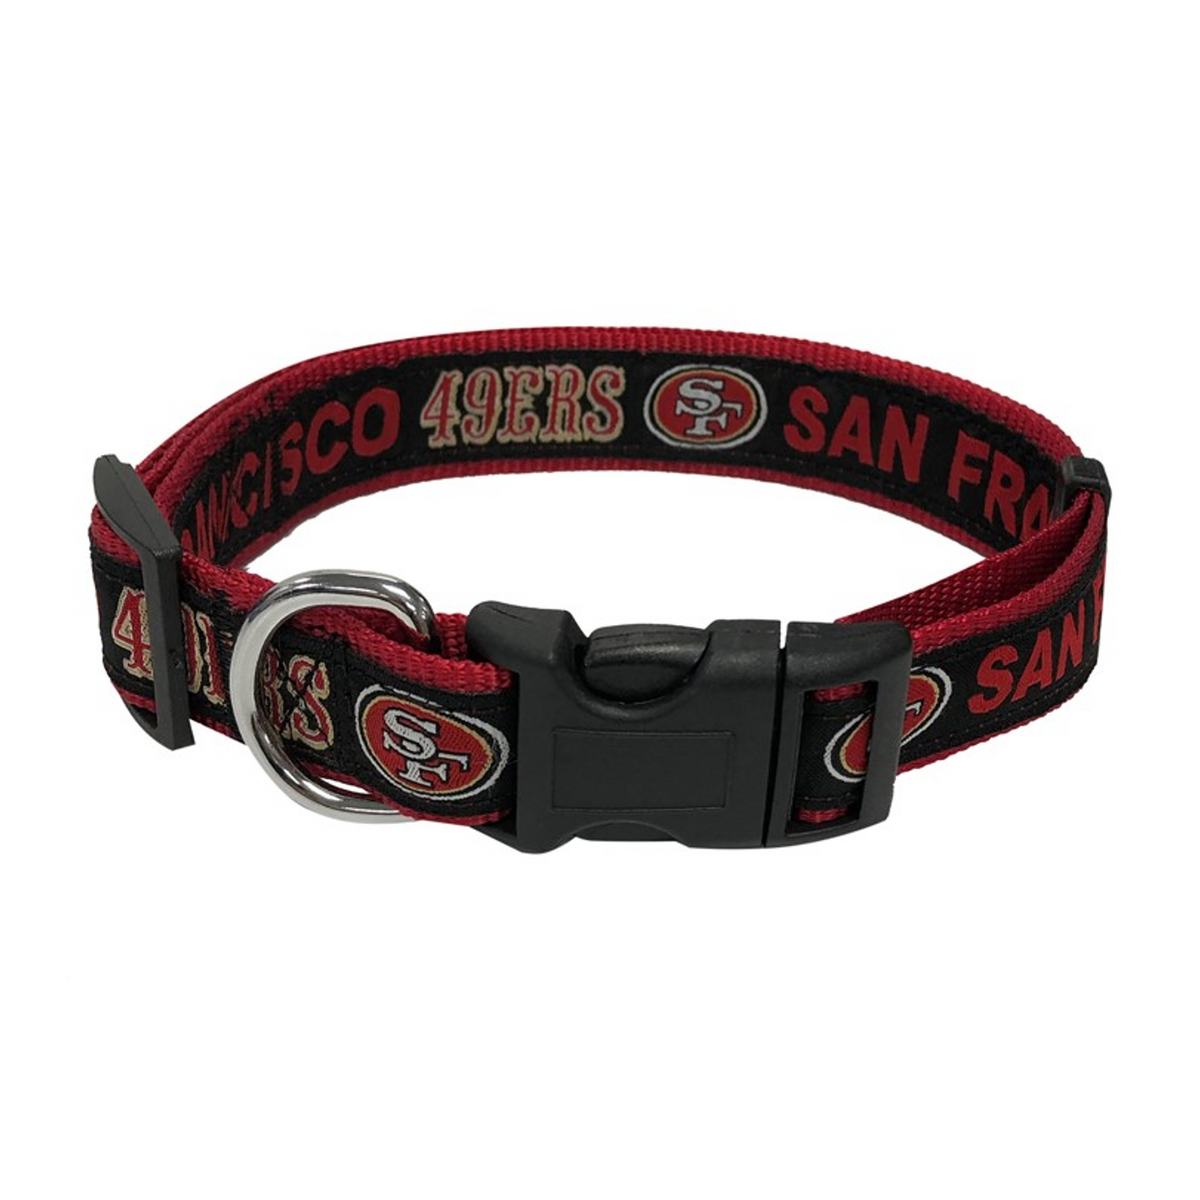 San Francisco 49ers Dog Collar or Leash - 3 Red Rovers